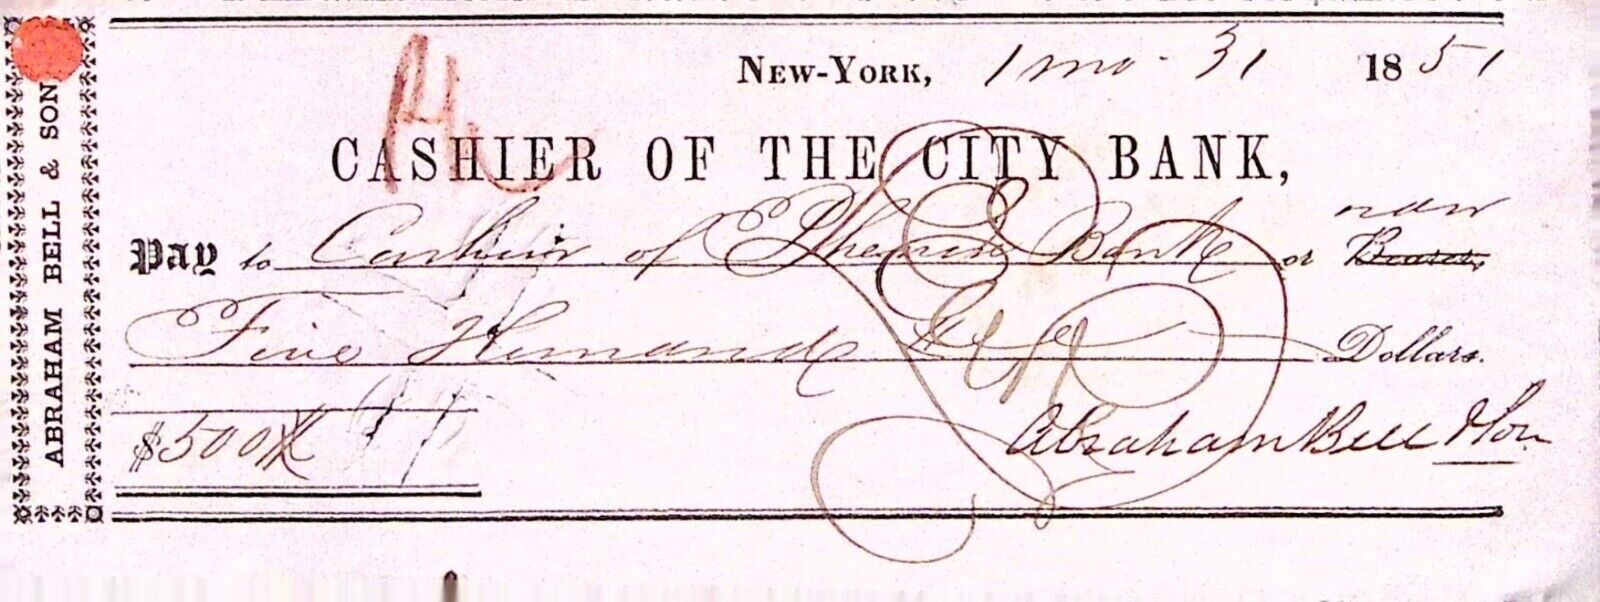 Abraham low-pricing Bell & Son New York Free shipping anywhere in the nation 1851 City of Bank Check Cashier